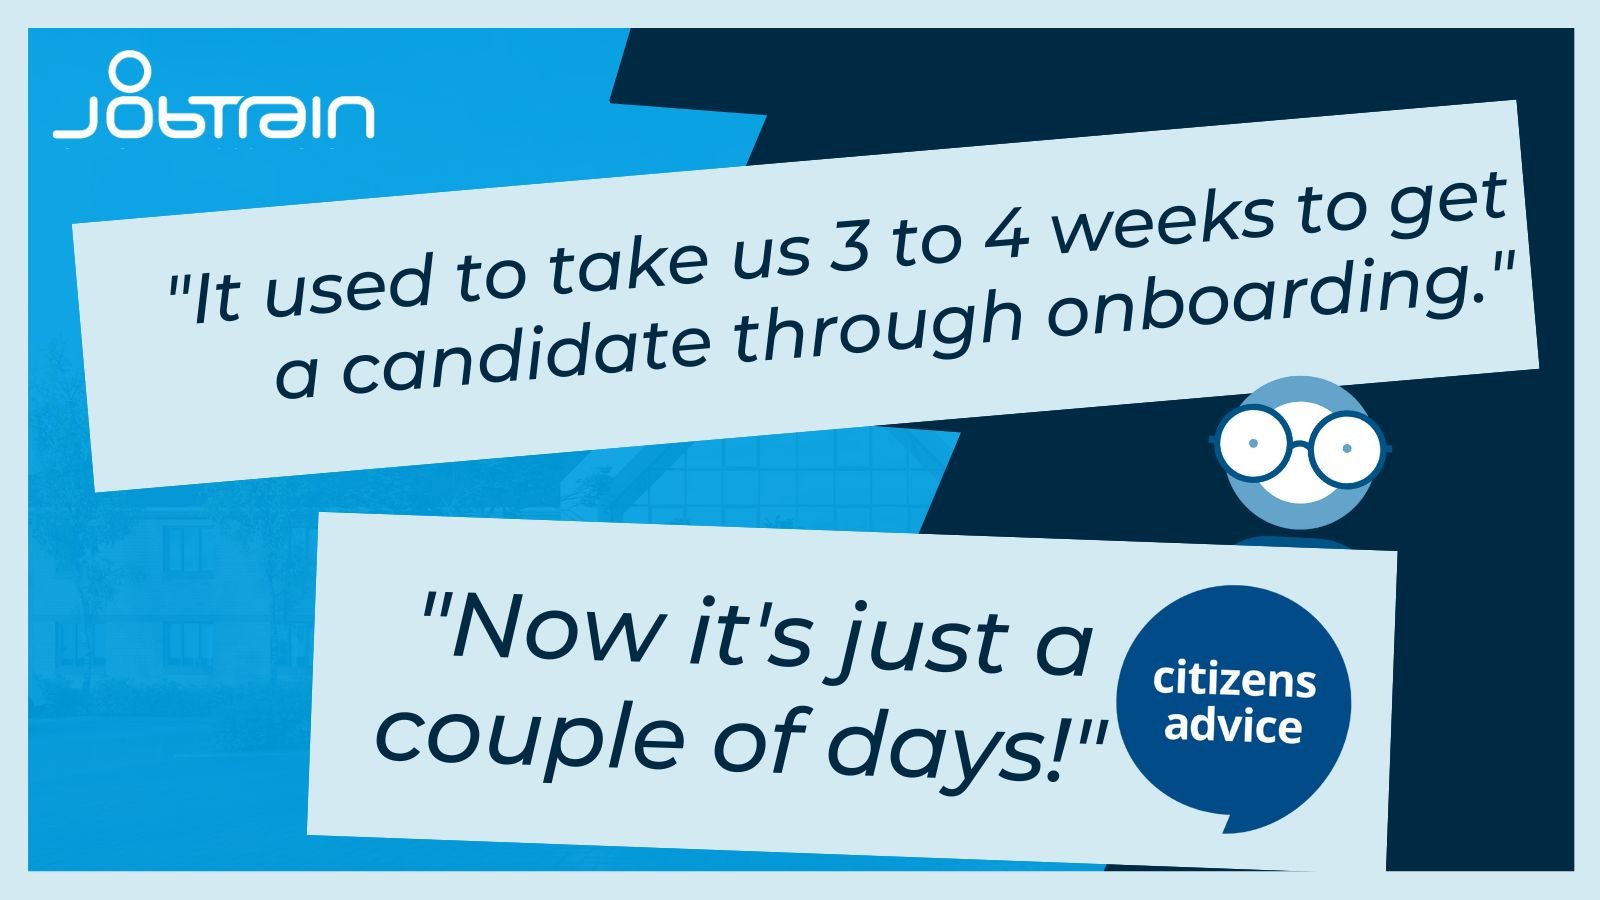 "It used to take us 3 to 4 weeks to get a candidate through onboarding. Now it's just a couple of days!" Citizens Advice